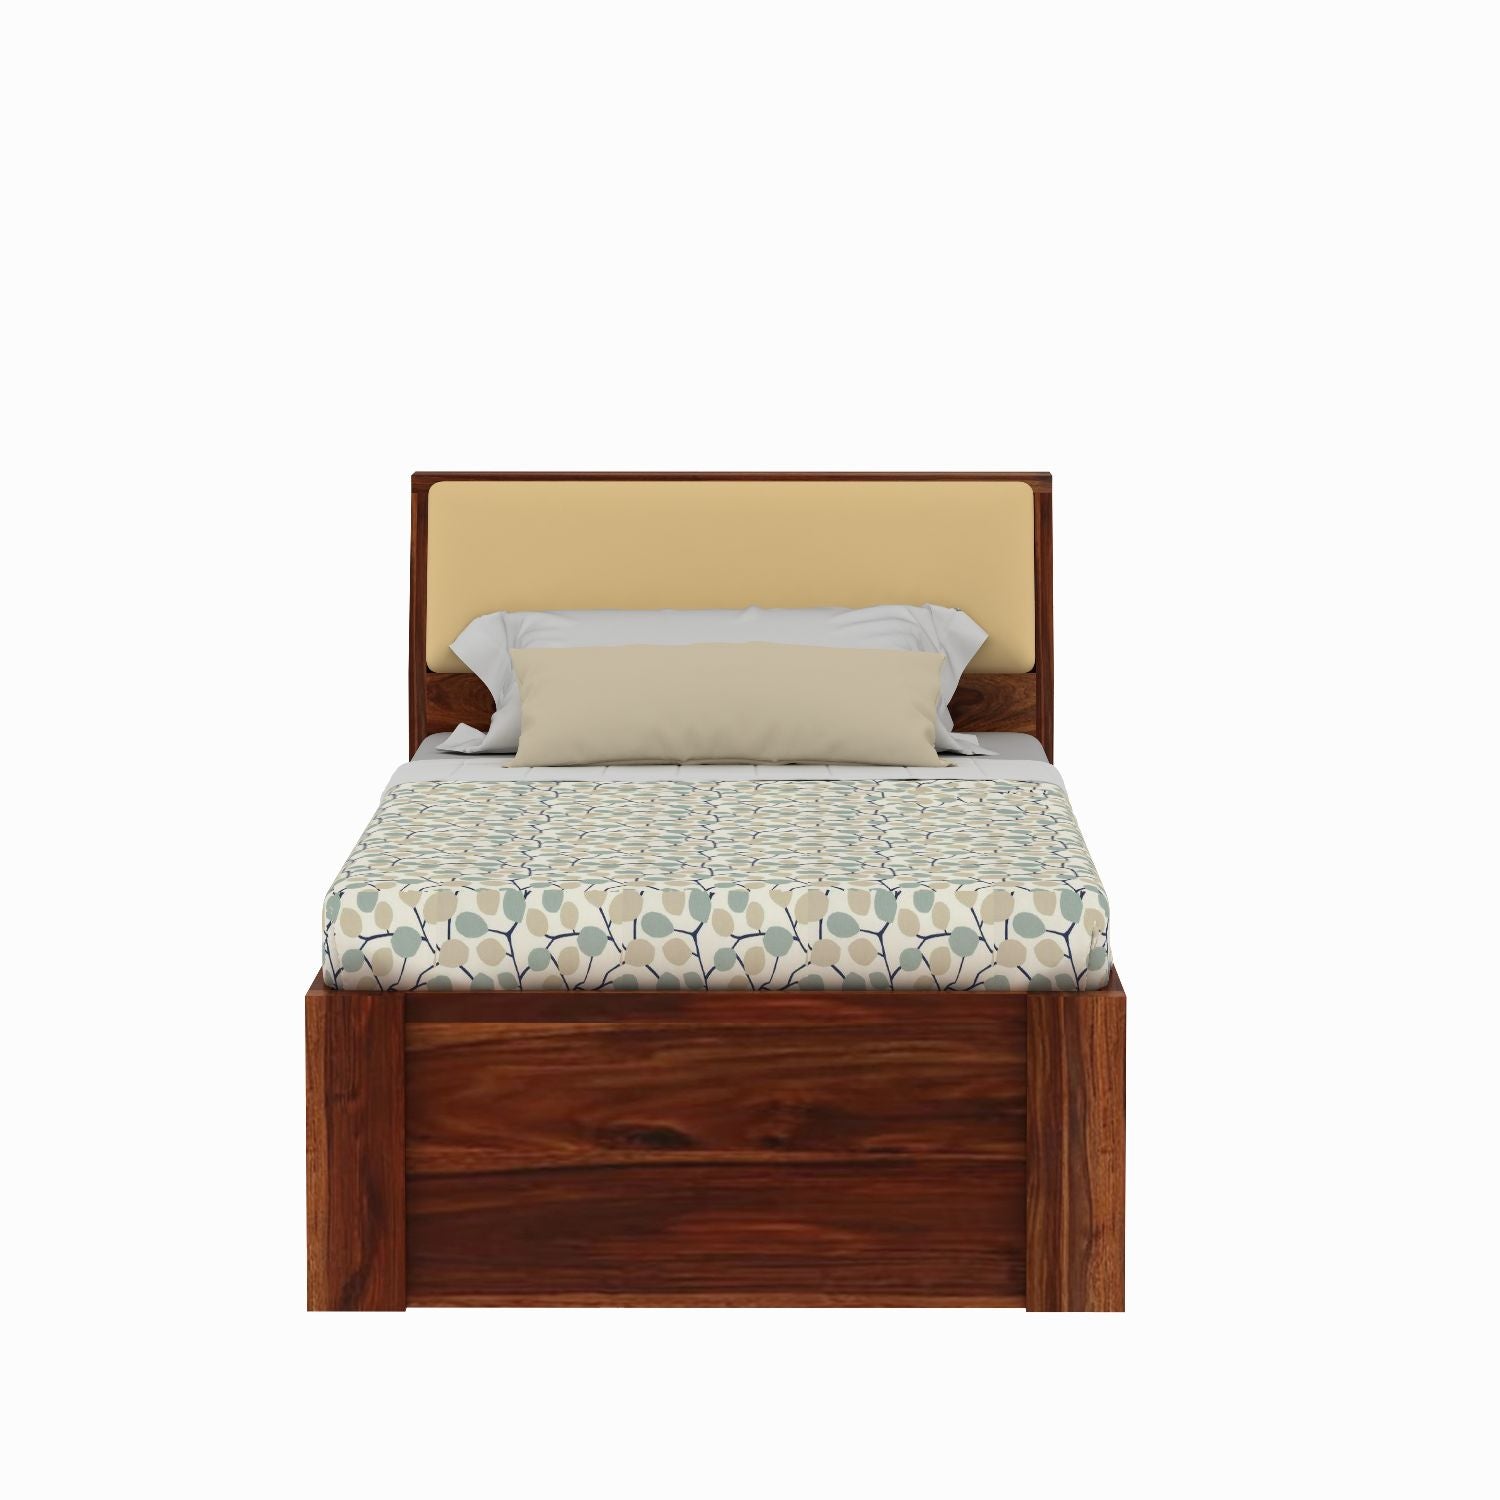 Rubikk Solid Sheesham Wood Single Bed With Two Drawers (Natural Finish)